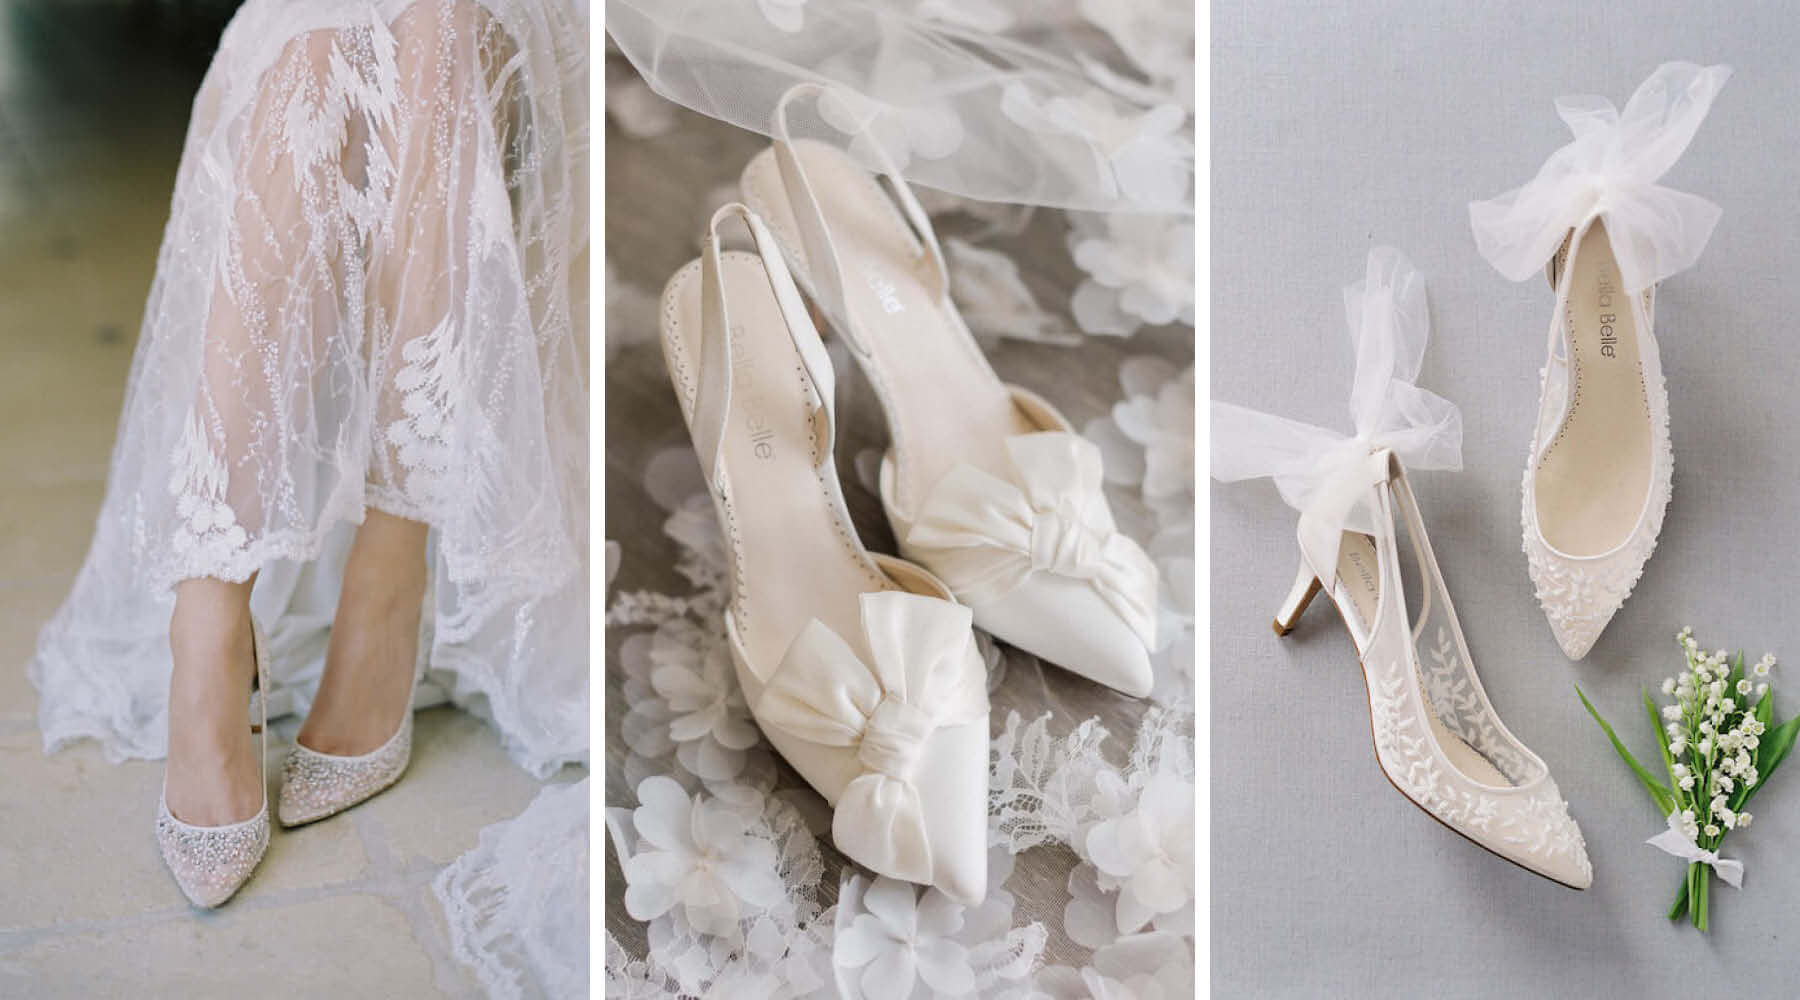 5 Common Fashion Mistakes Brides Make (and How to Avoid Them) - Black Bride